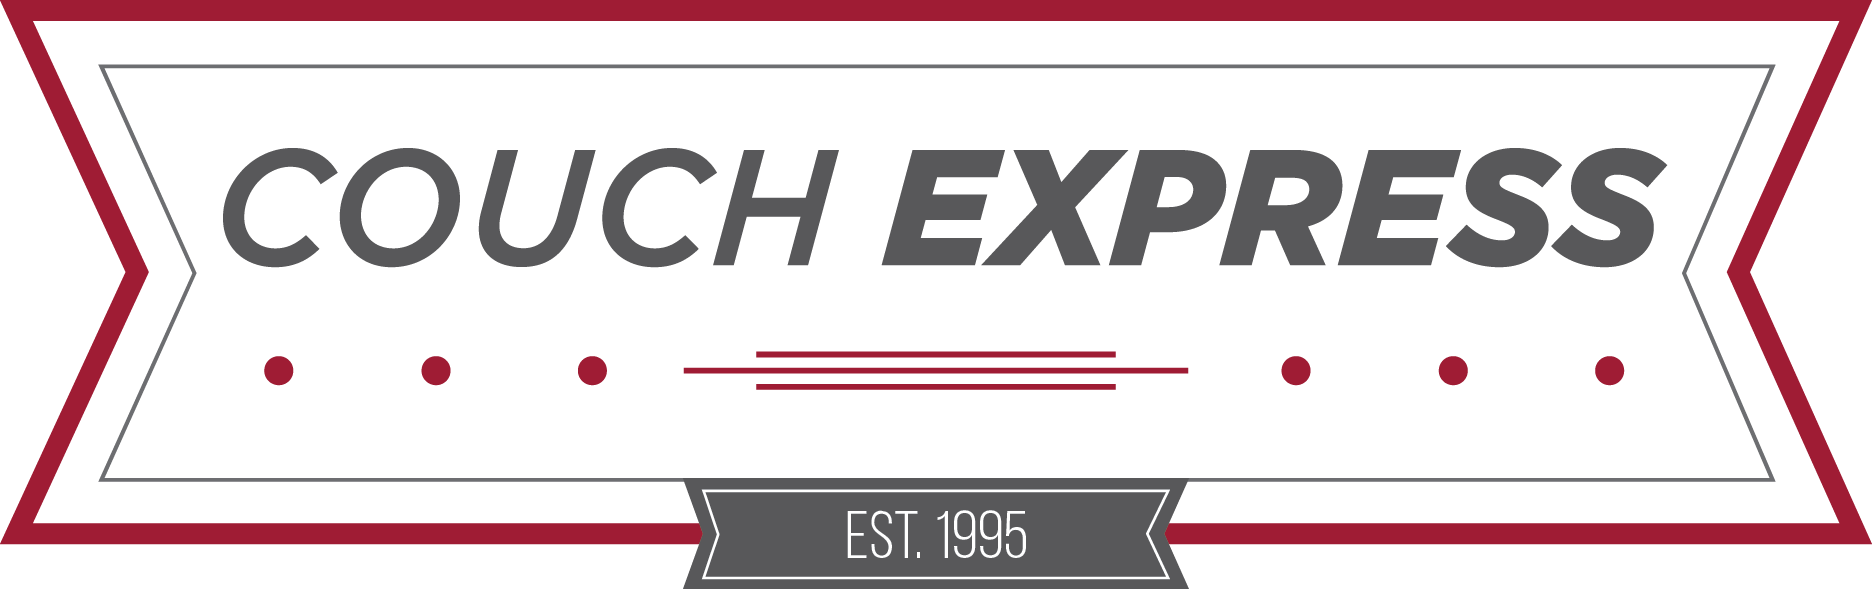 Couch Express logo